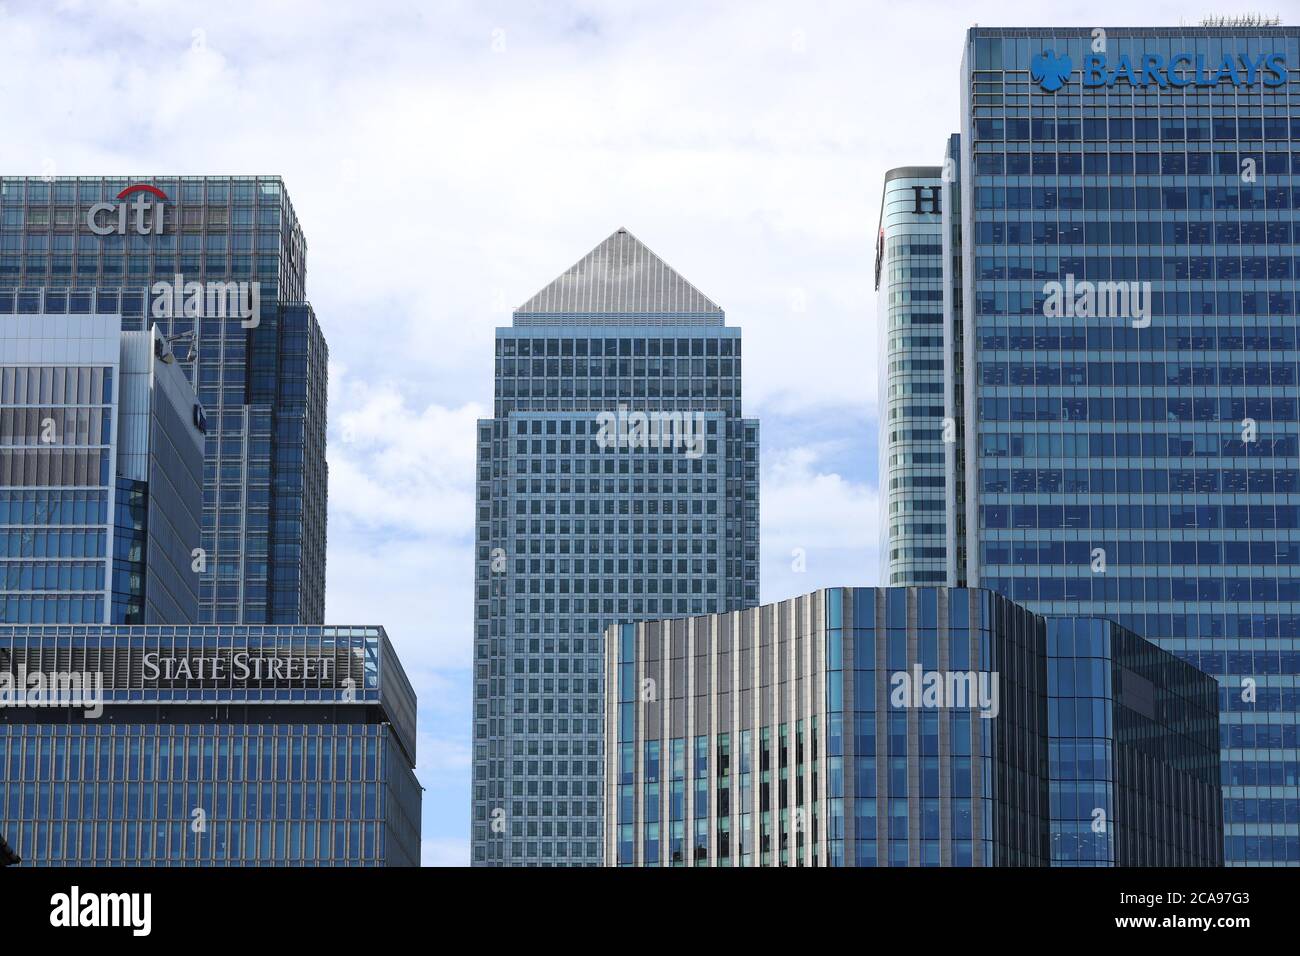 A general view of the Canary Wharf skyline, seen from Blackwall Basin, including the offices of HSBC, Barclays, State Street, Citi Bank, and the One Canada Square building. Stock Photo